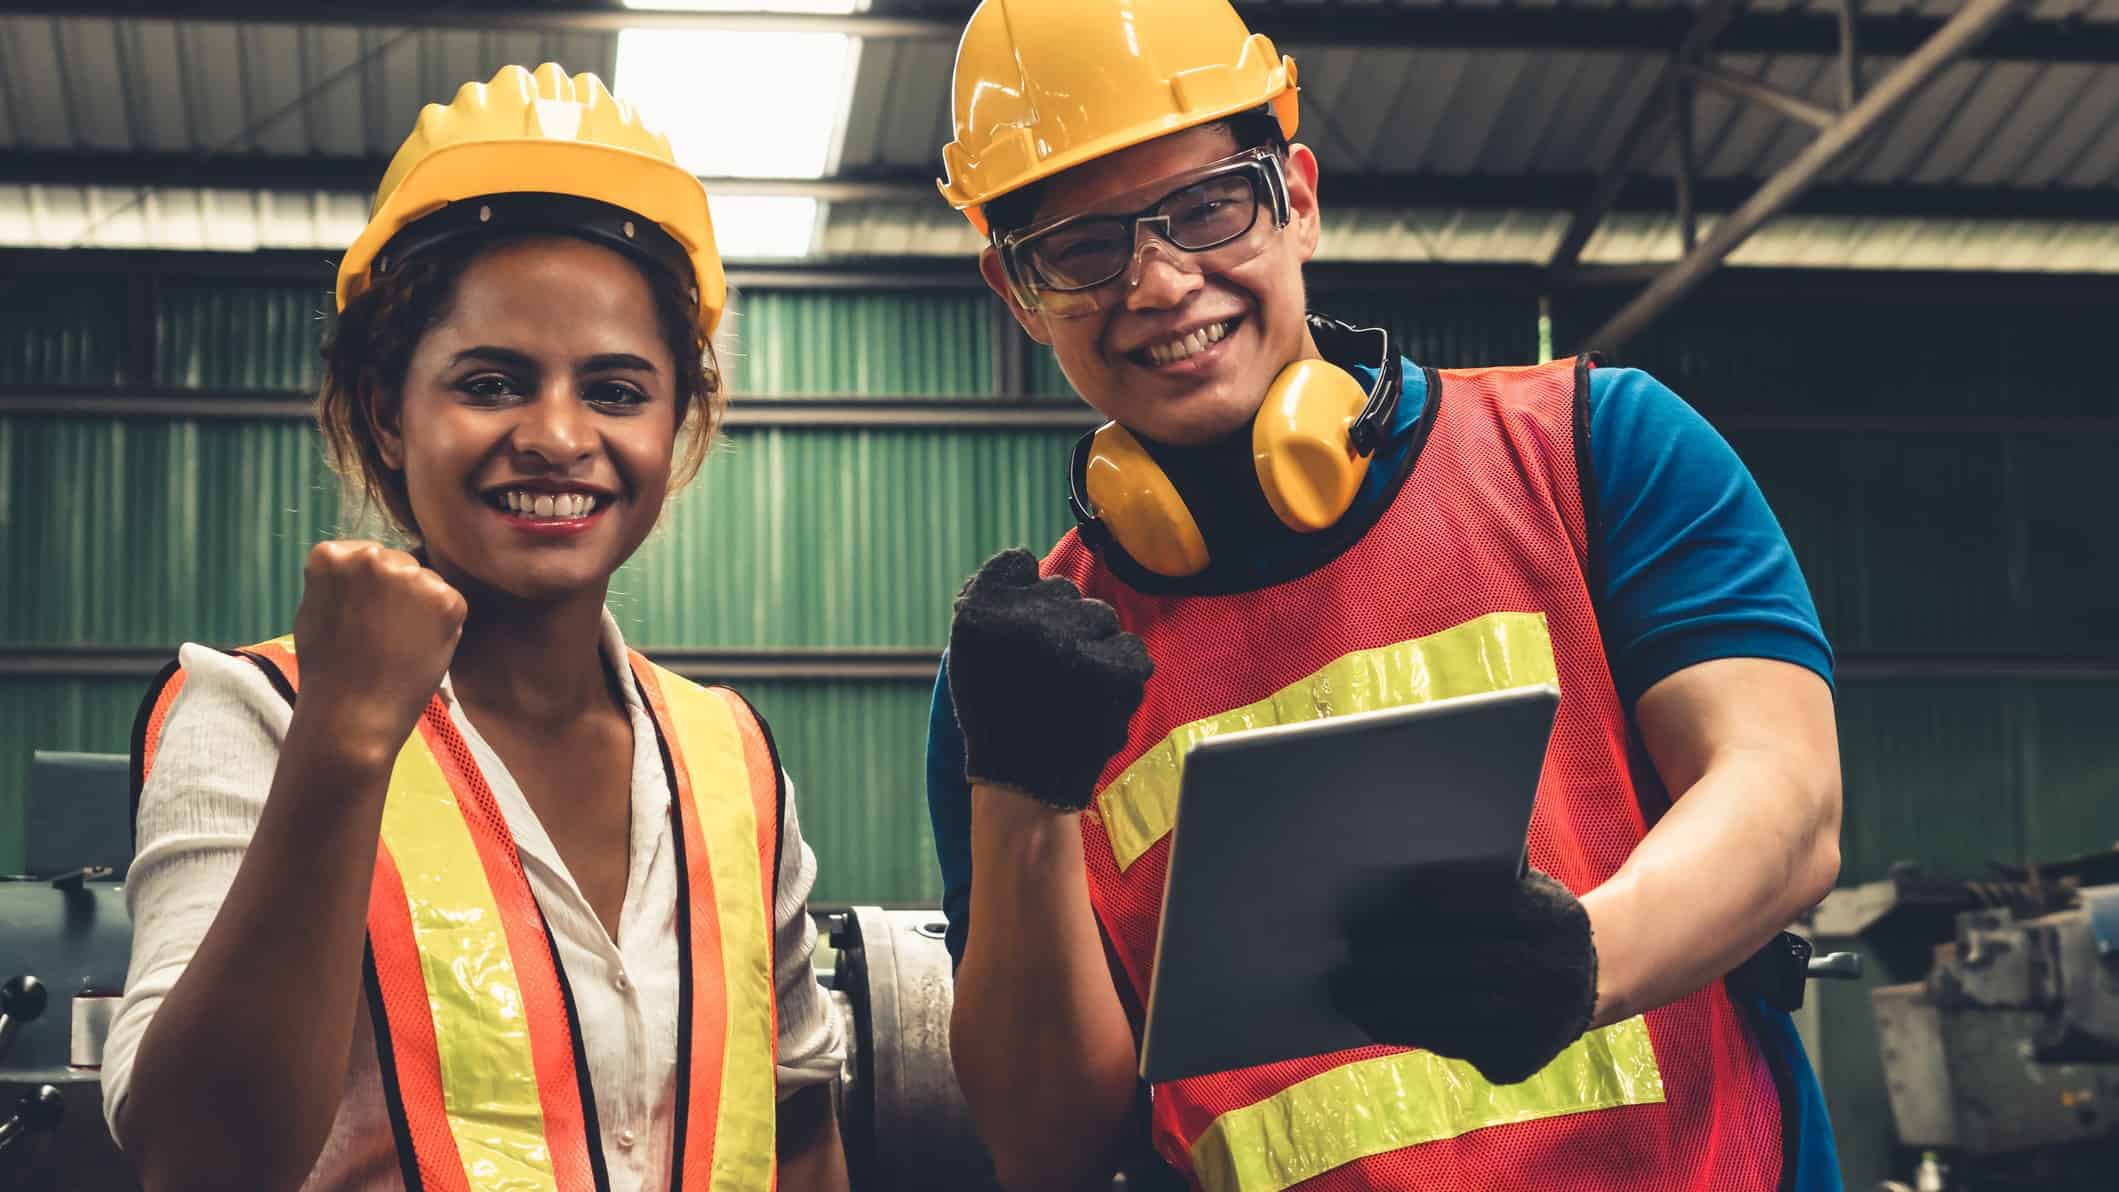 two workers in hard hats and high visibility gear give celebratory fist pumps while checking paperwork at a processing site with equipment in the background.